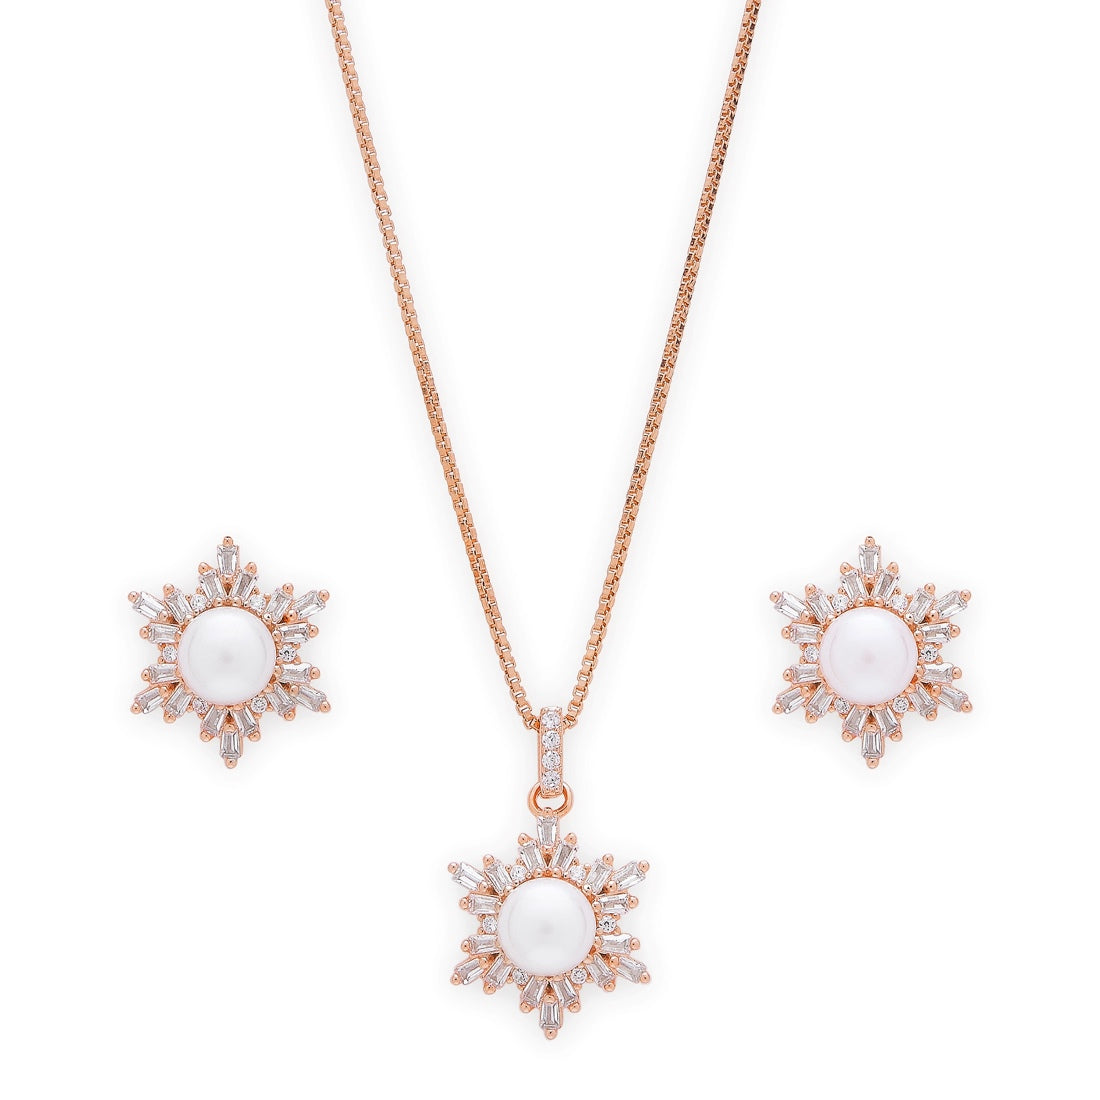 Snowflake Elegance Rose gold Plated 925 Sterling Silver Jewelry Set